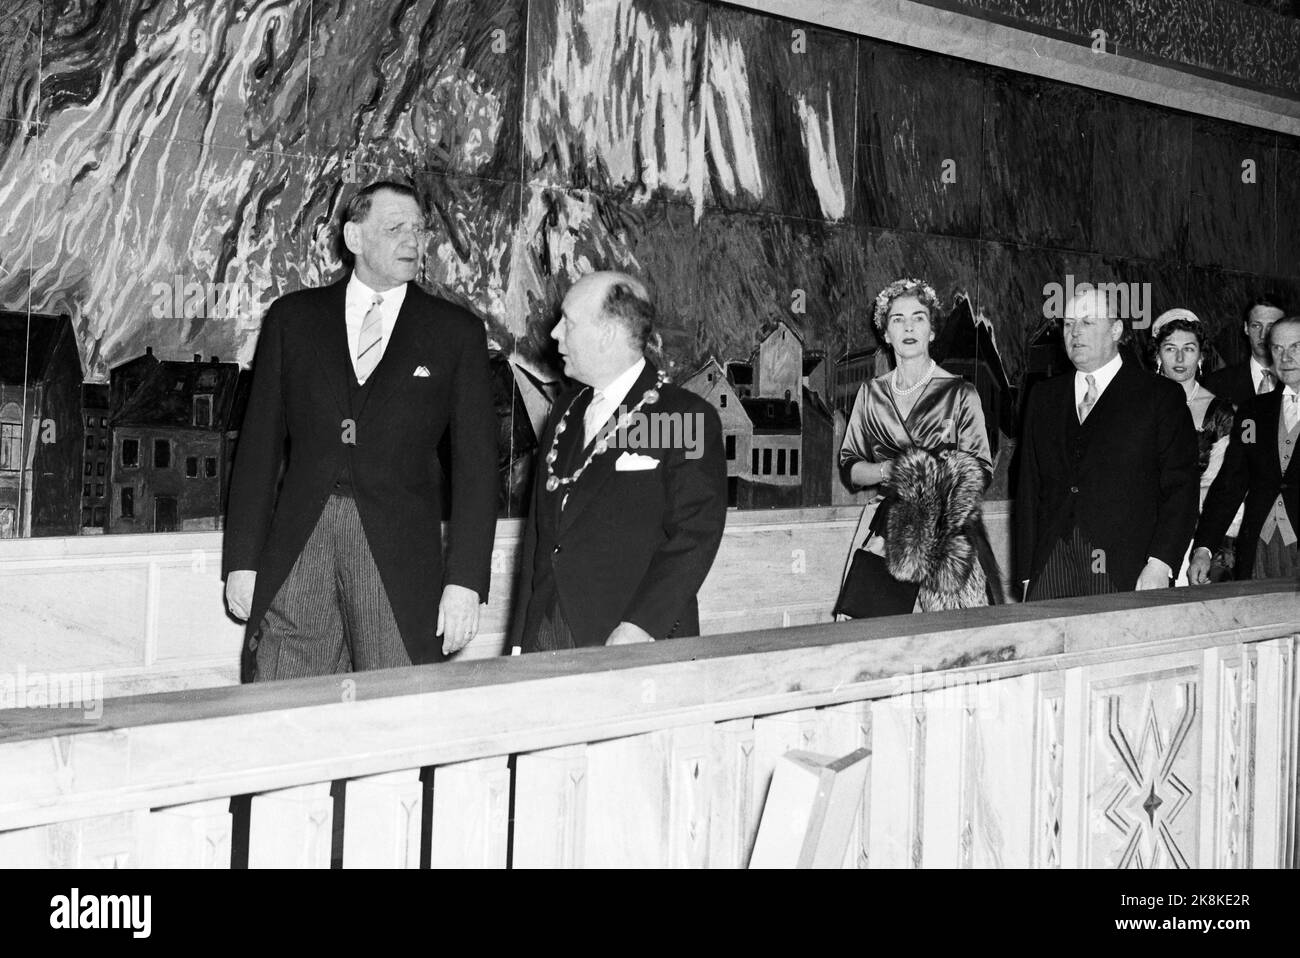 Oslo 196002. Queen Ingrid and King Frederik of Denmark on an official visit to Norway. Here on Guided tour of Oslo City Hall together with Mayor Brynjulf Bull (t.h.) King Frederik, Queen Ingrid and King Olav. Photo: NTB Archive / NTB Stock Photo